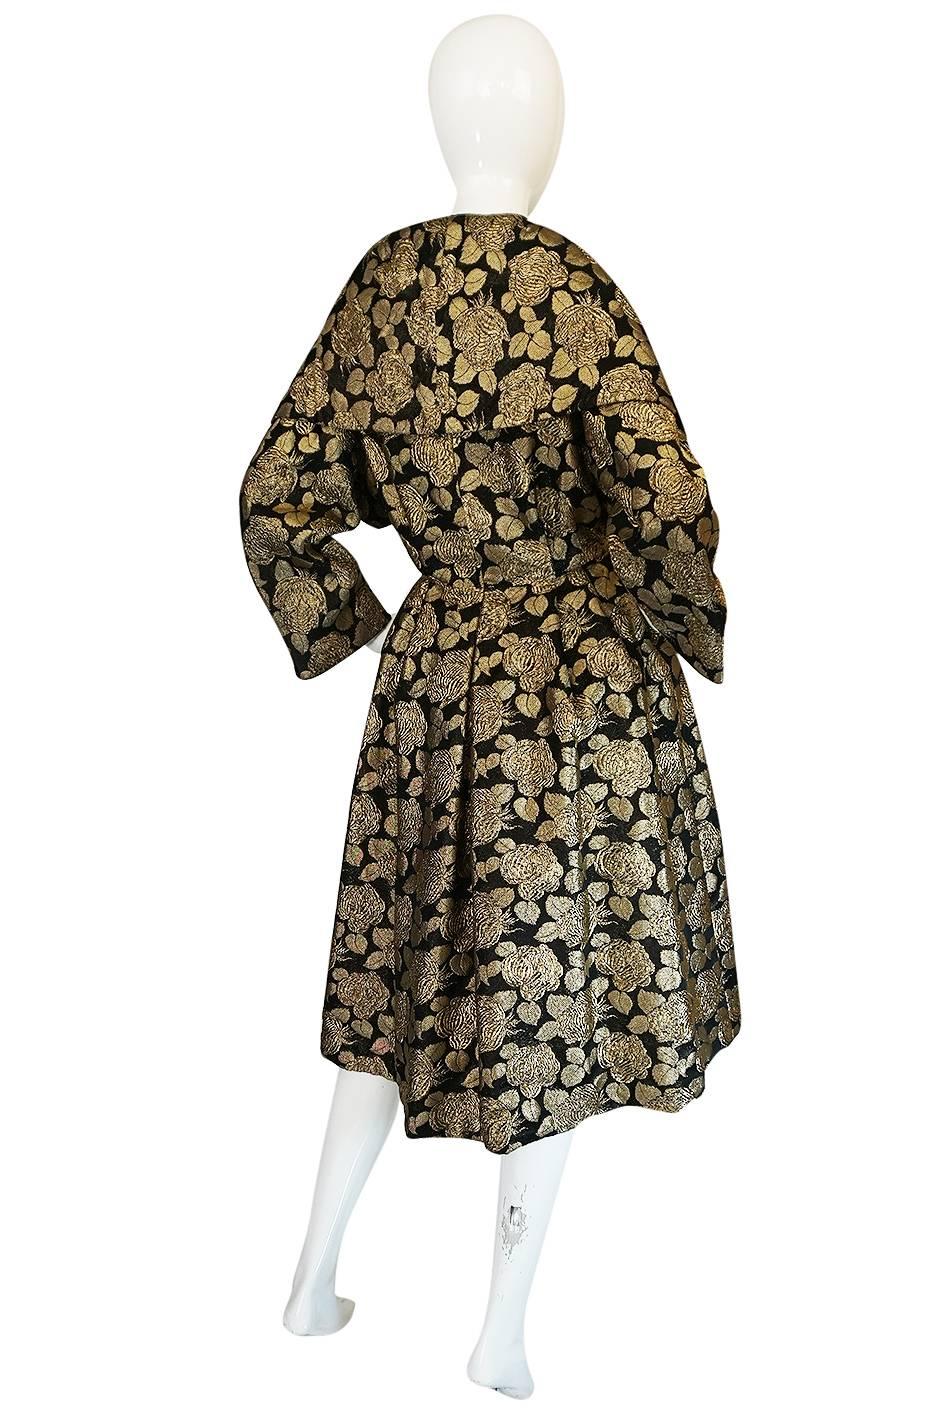 

The fabric on this coat is amazing. The gold thread used is a real metallic thread and it is woven through the black base with different weaves to create the most wonderful effect and allow the rose pattern to feel like it is raised off the